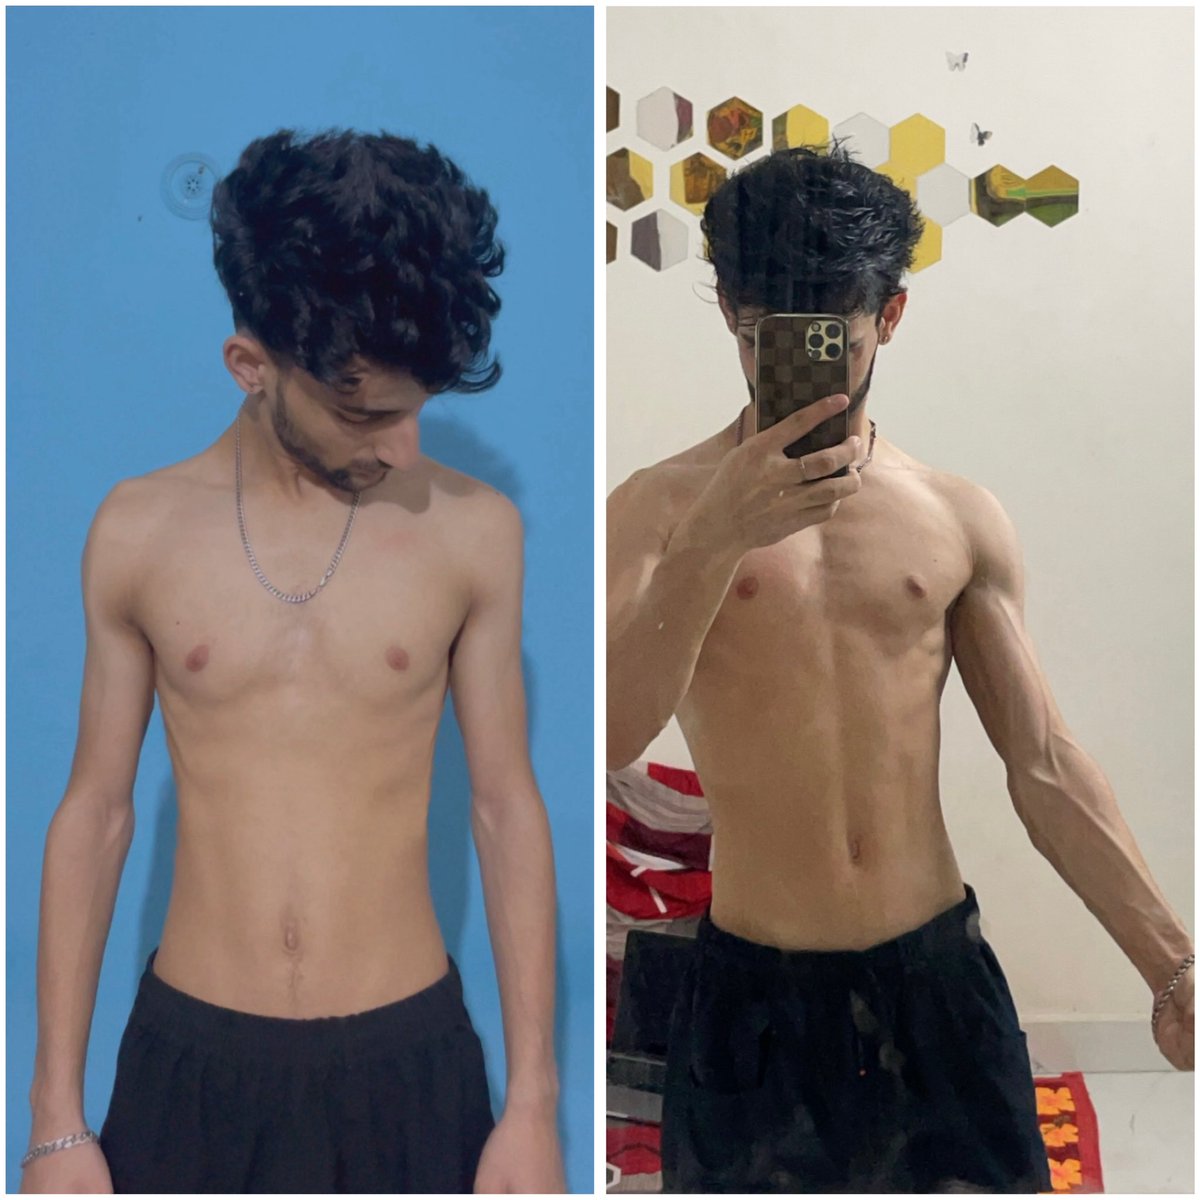 45 days body transformation.
Follow me and i will try to give you some tips regularly. 
#gymmotivation #gym #bodytransformation #weightgai